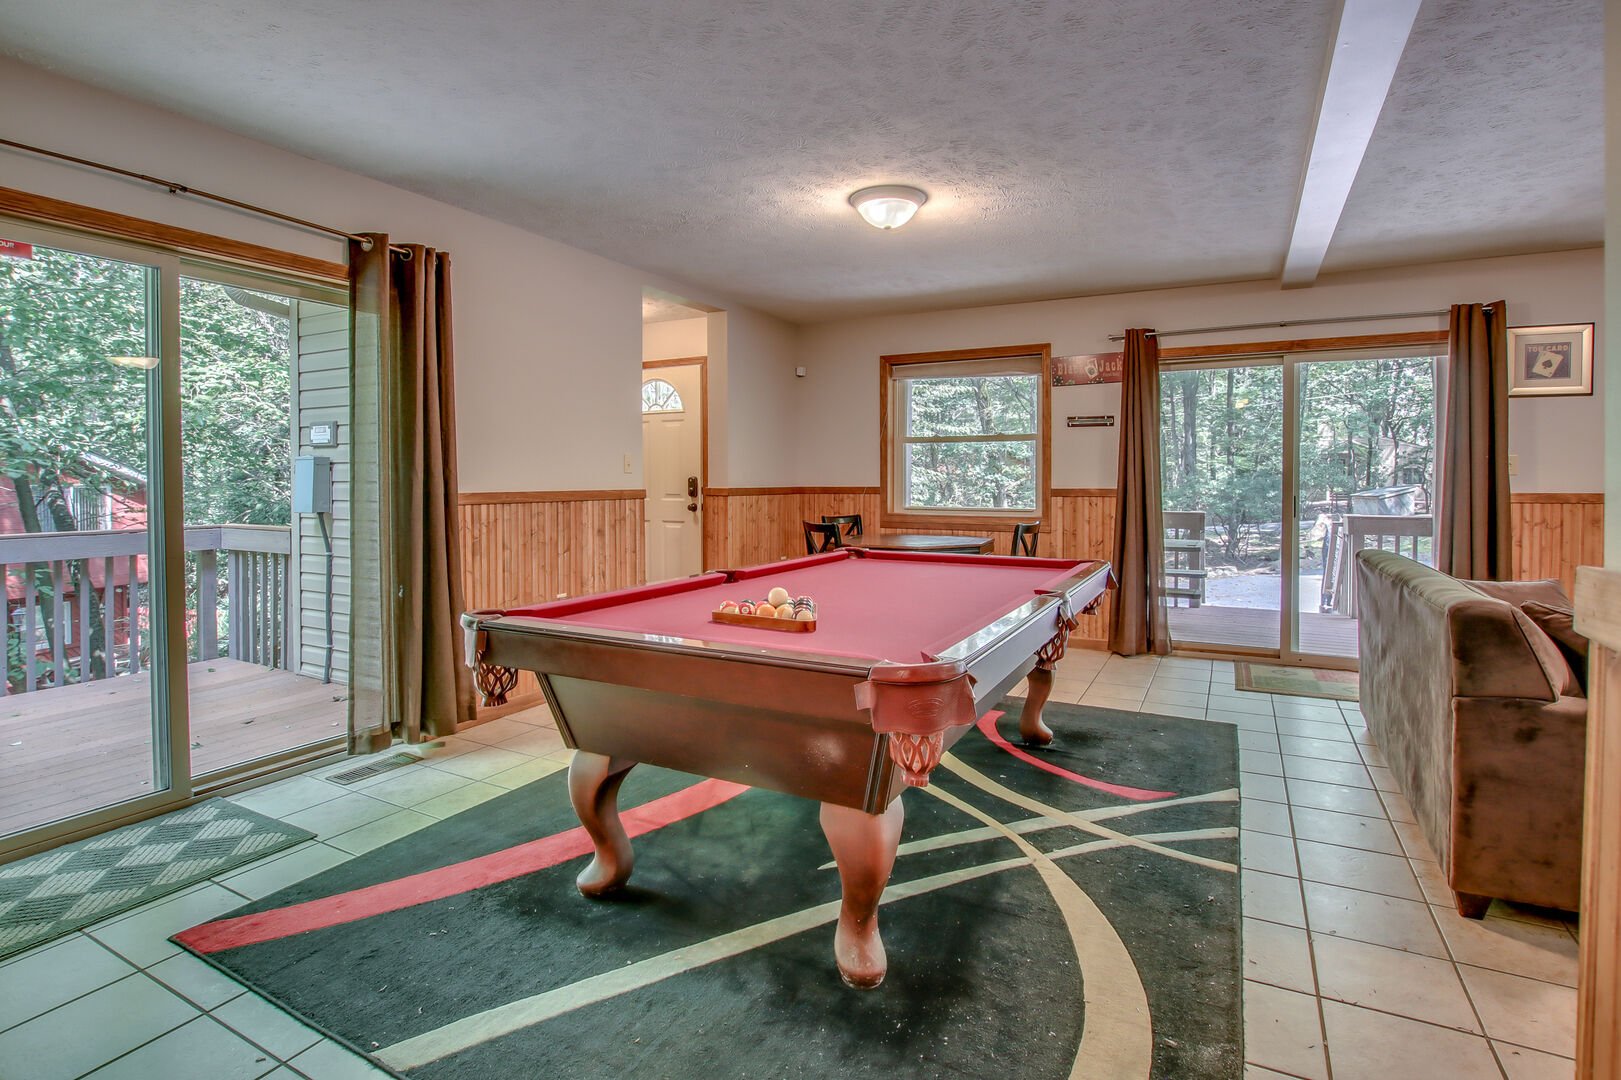 A pool table in the middle of the game room on a multicolored rug, with a couch to the right and sliding glass door to the left and behind.